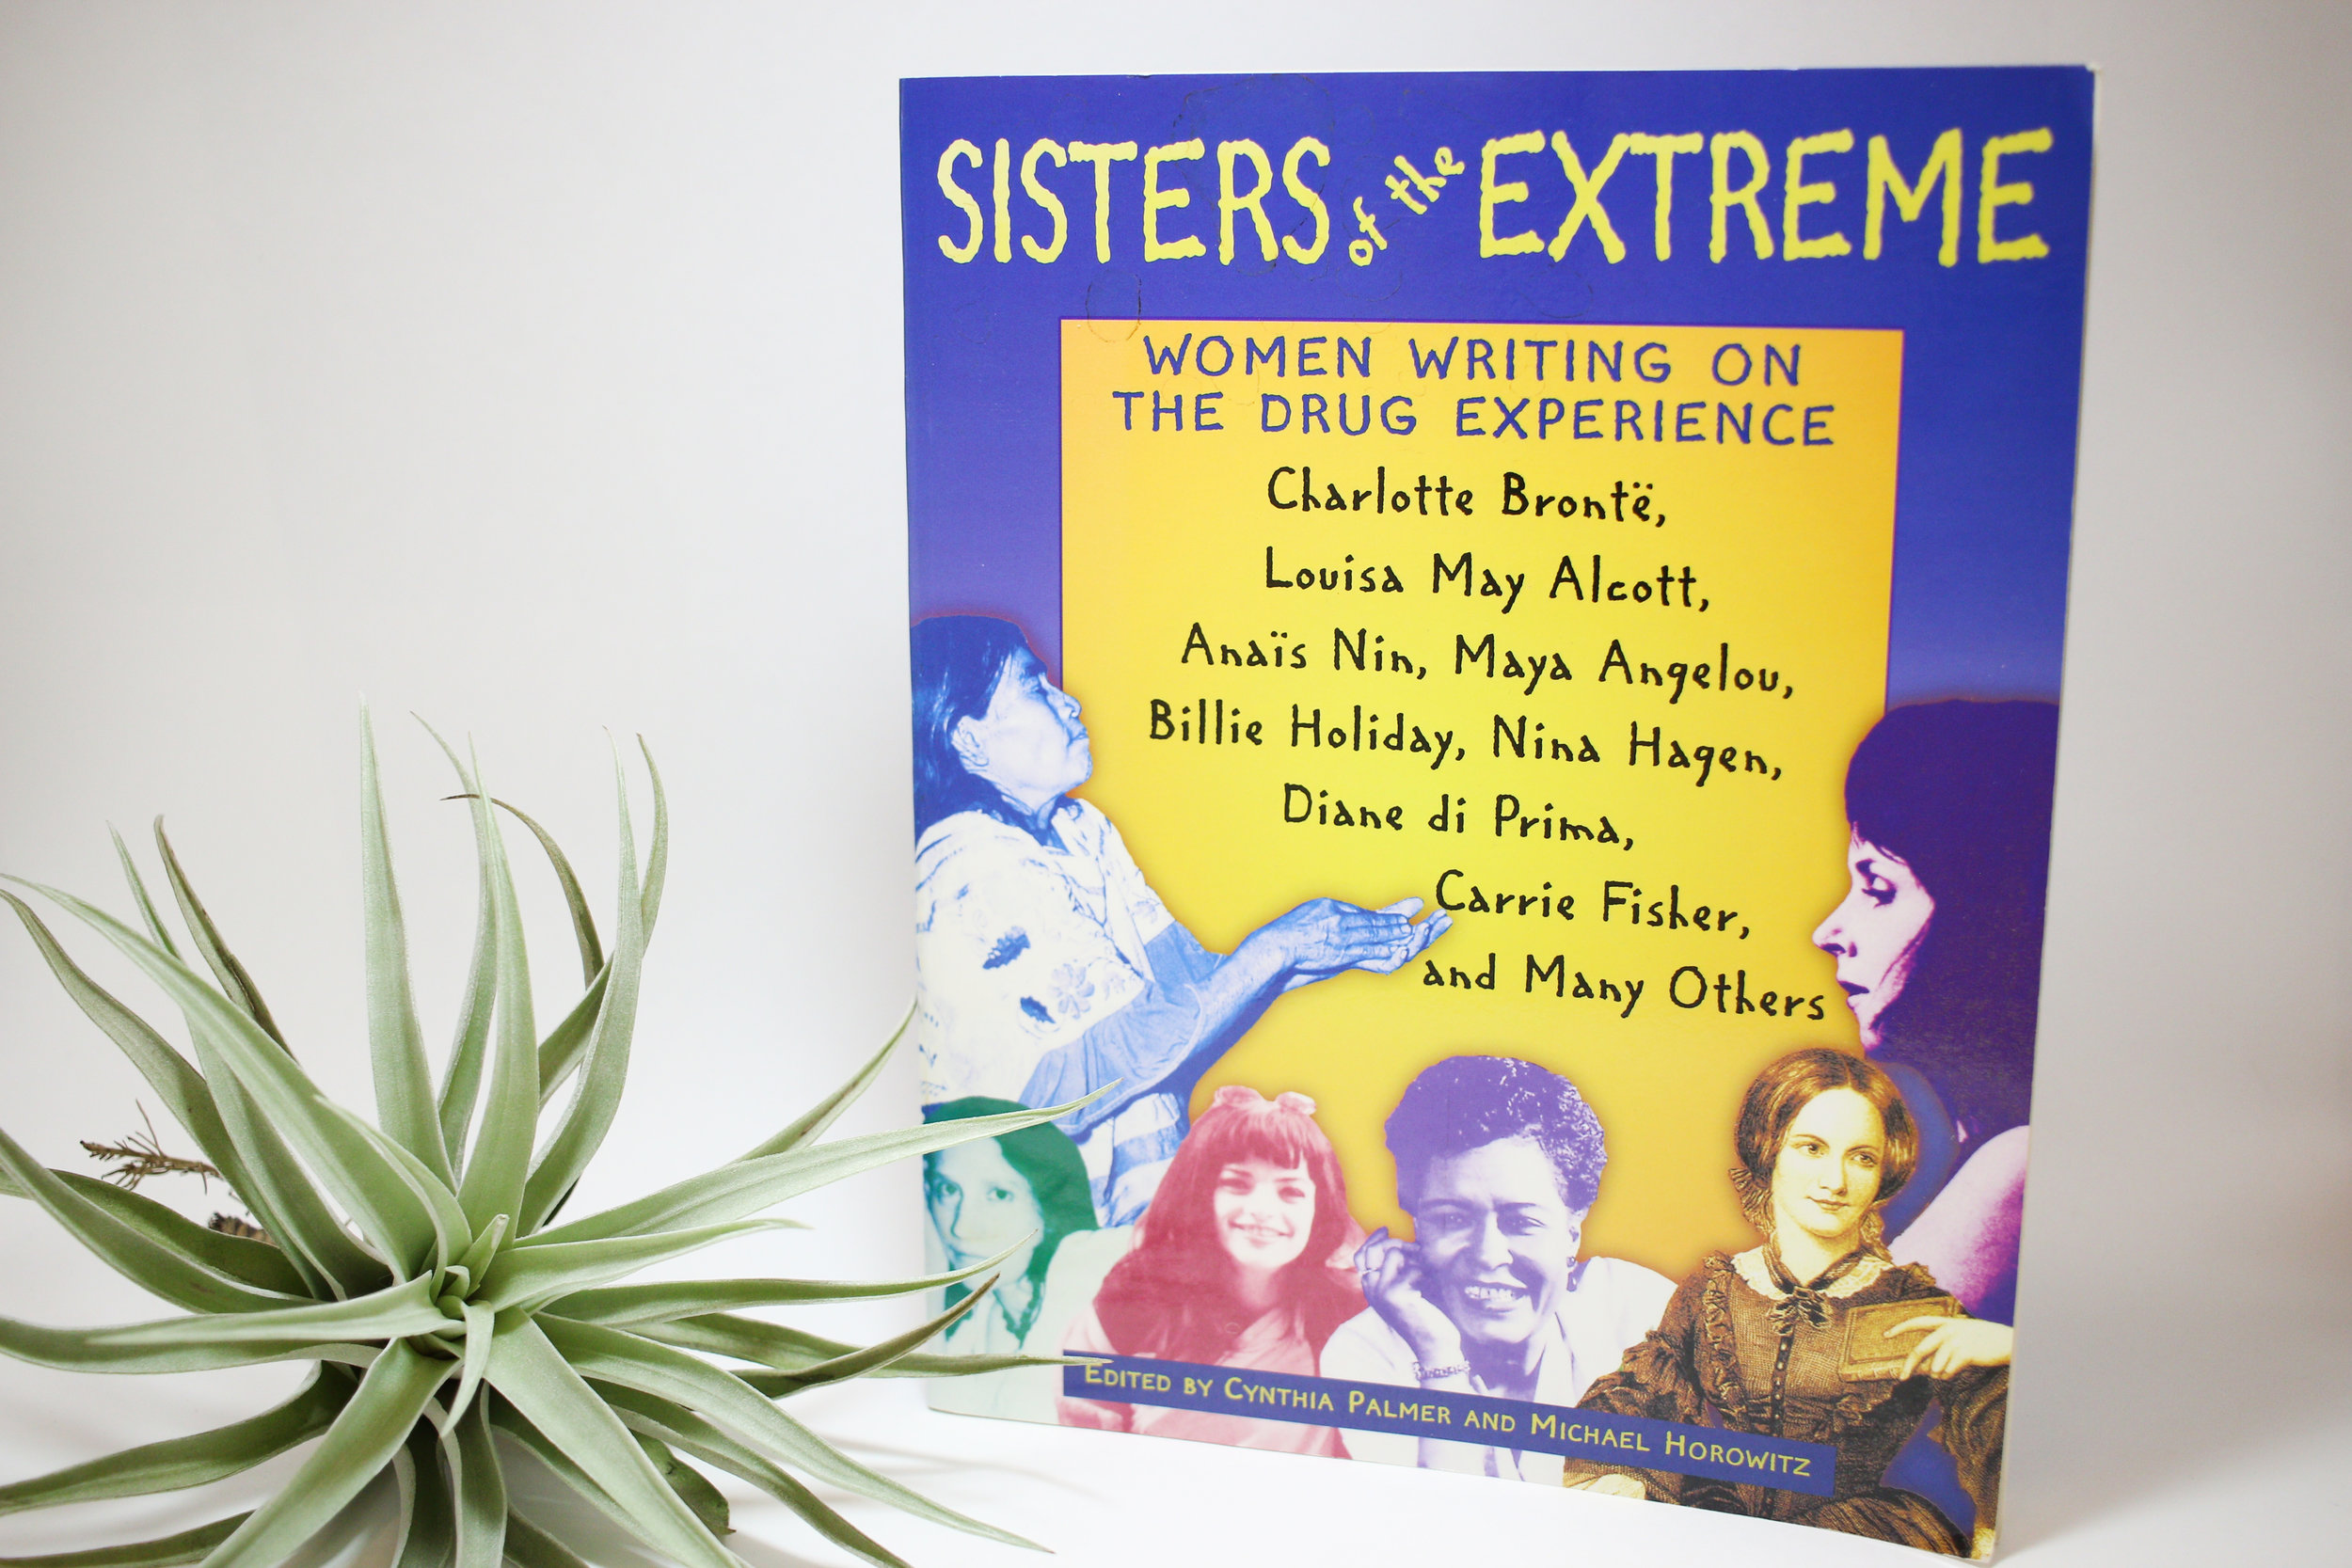 "Sisters of the Extreme"